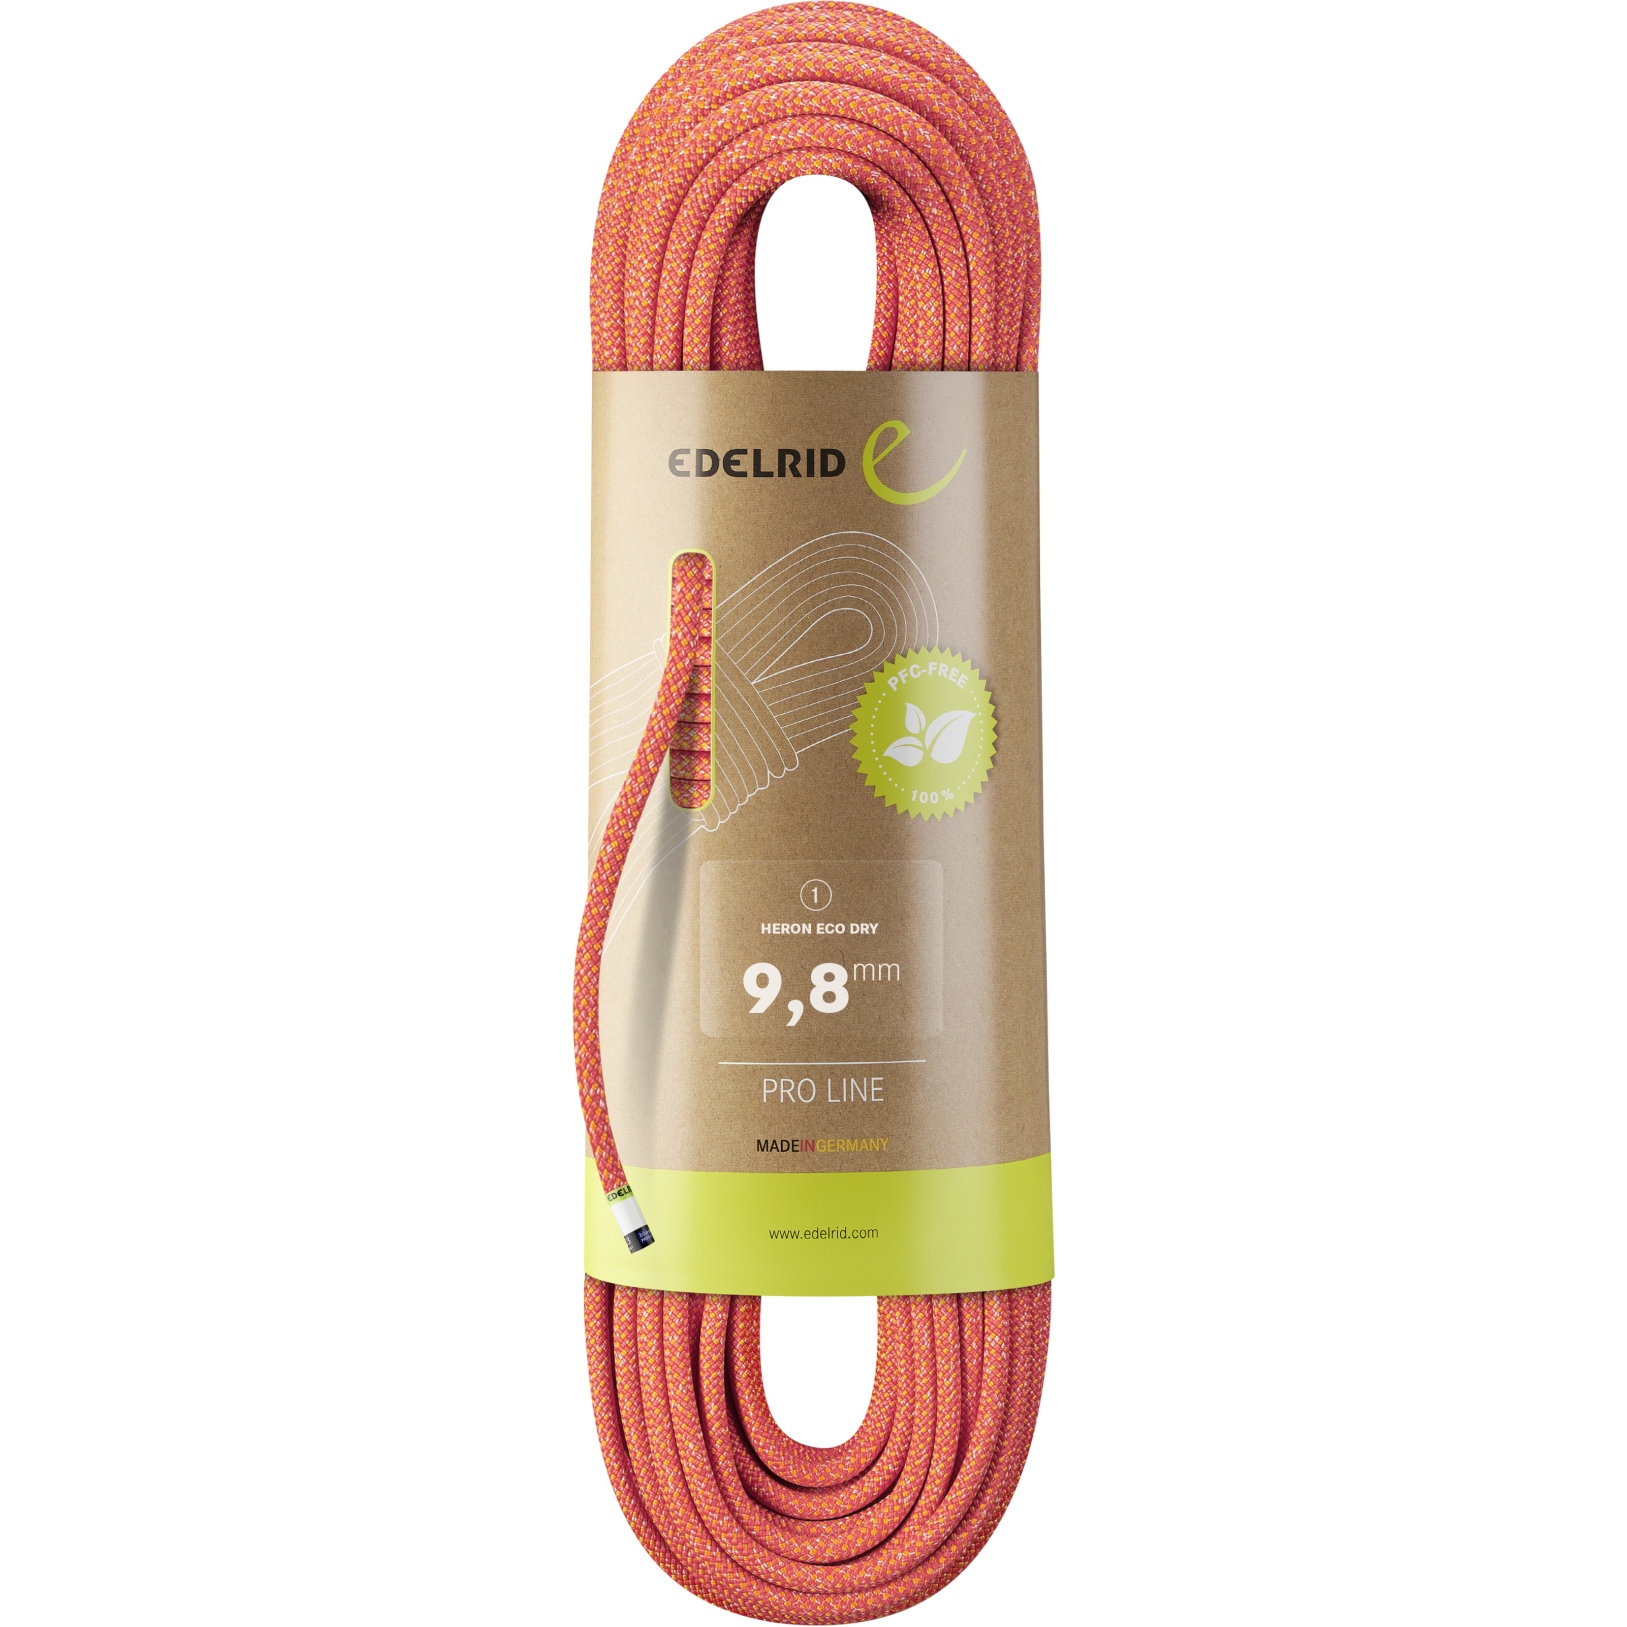 Image of Edelrid Heron Eco Dry 9,8mm Rope - 60m - fire